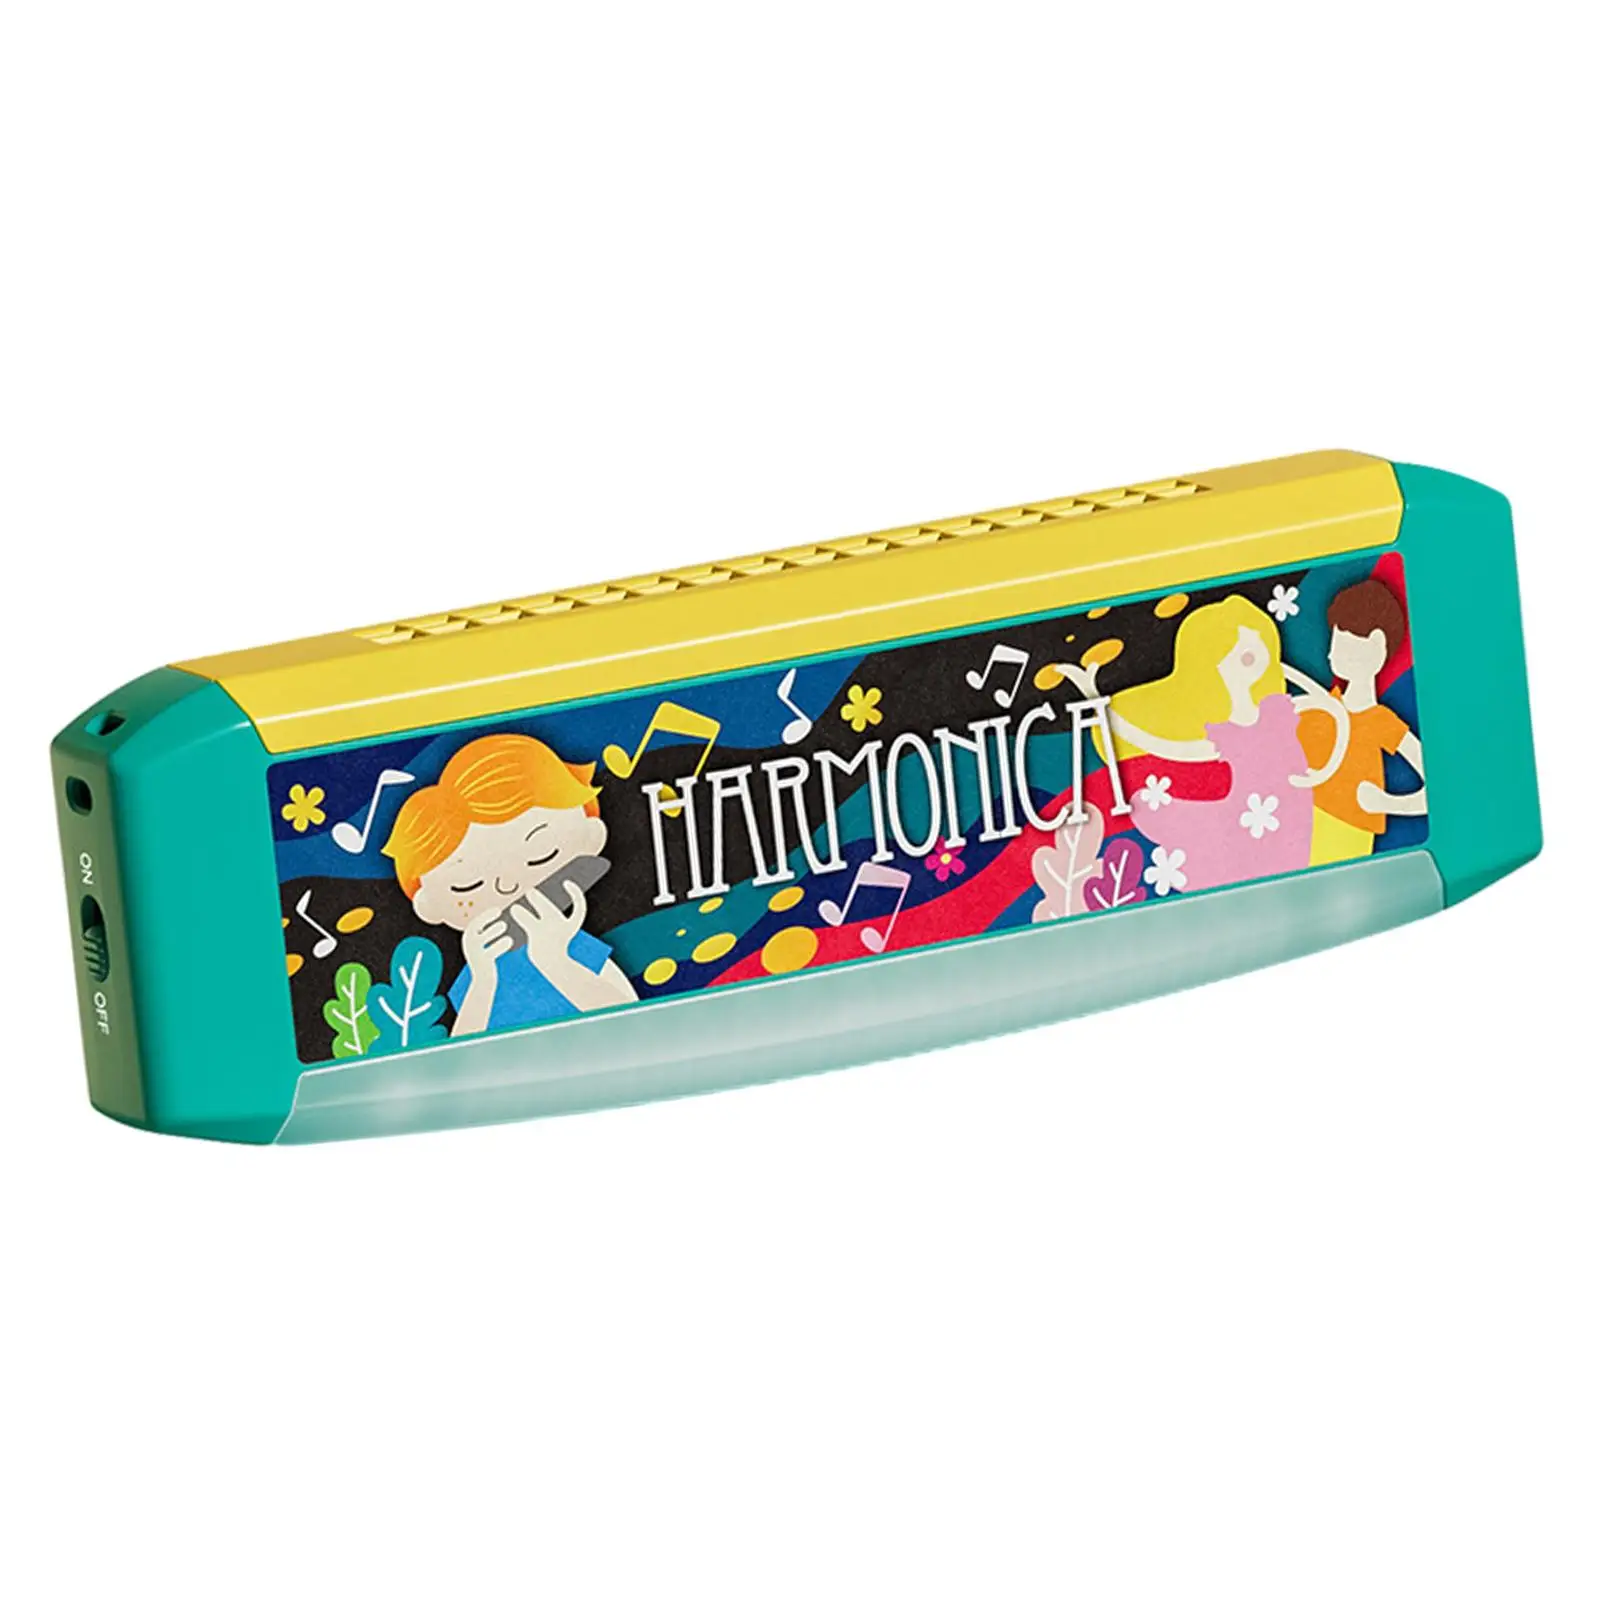 16 Holes Harmonica Musical Instrument Play Toy, Easy to Play, Kids Harmonica Mouth Organ for Travel